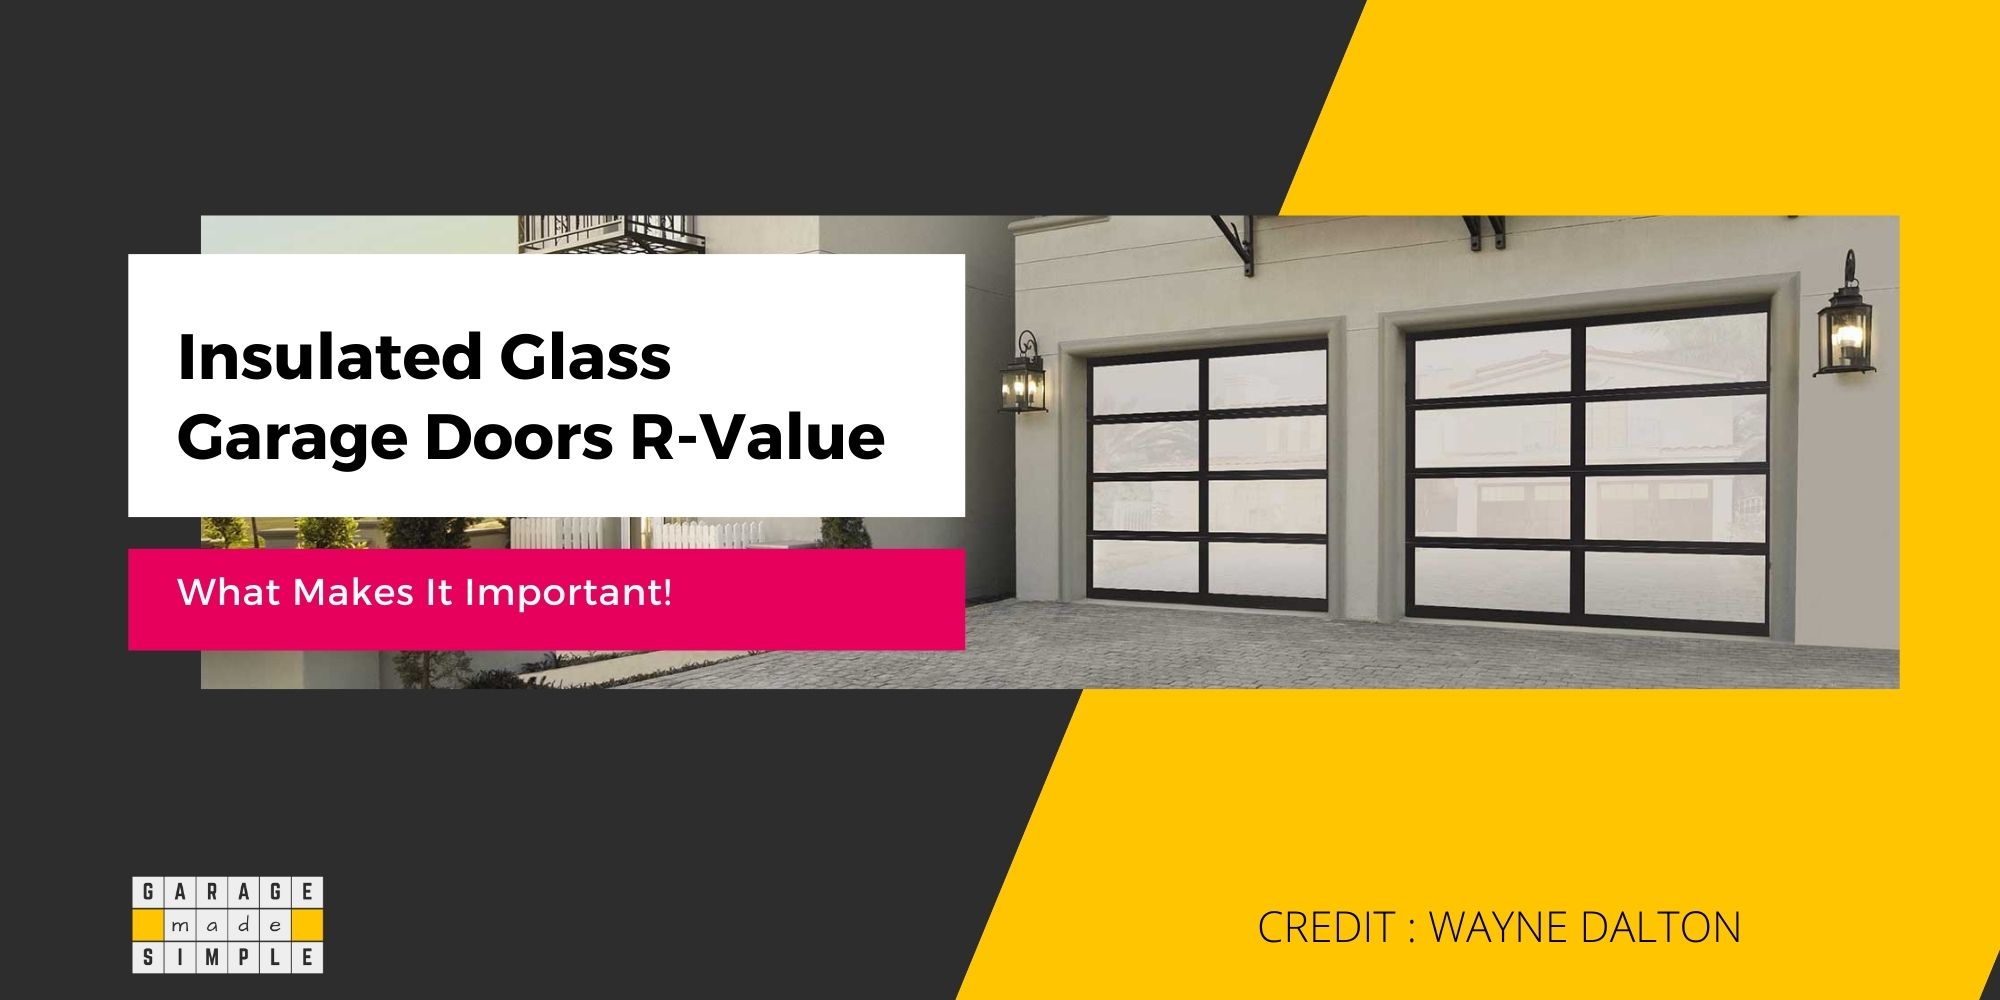 Insulated Glass Garage Doors R-Value (What Makes It Important?)